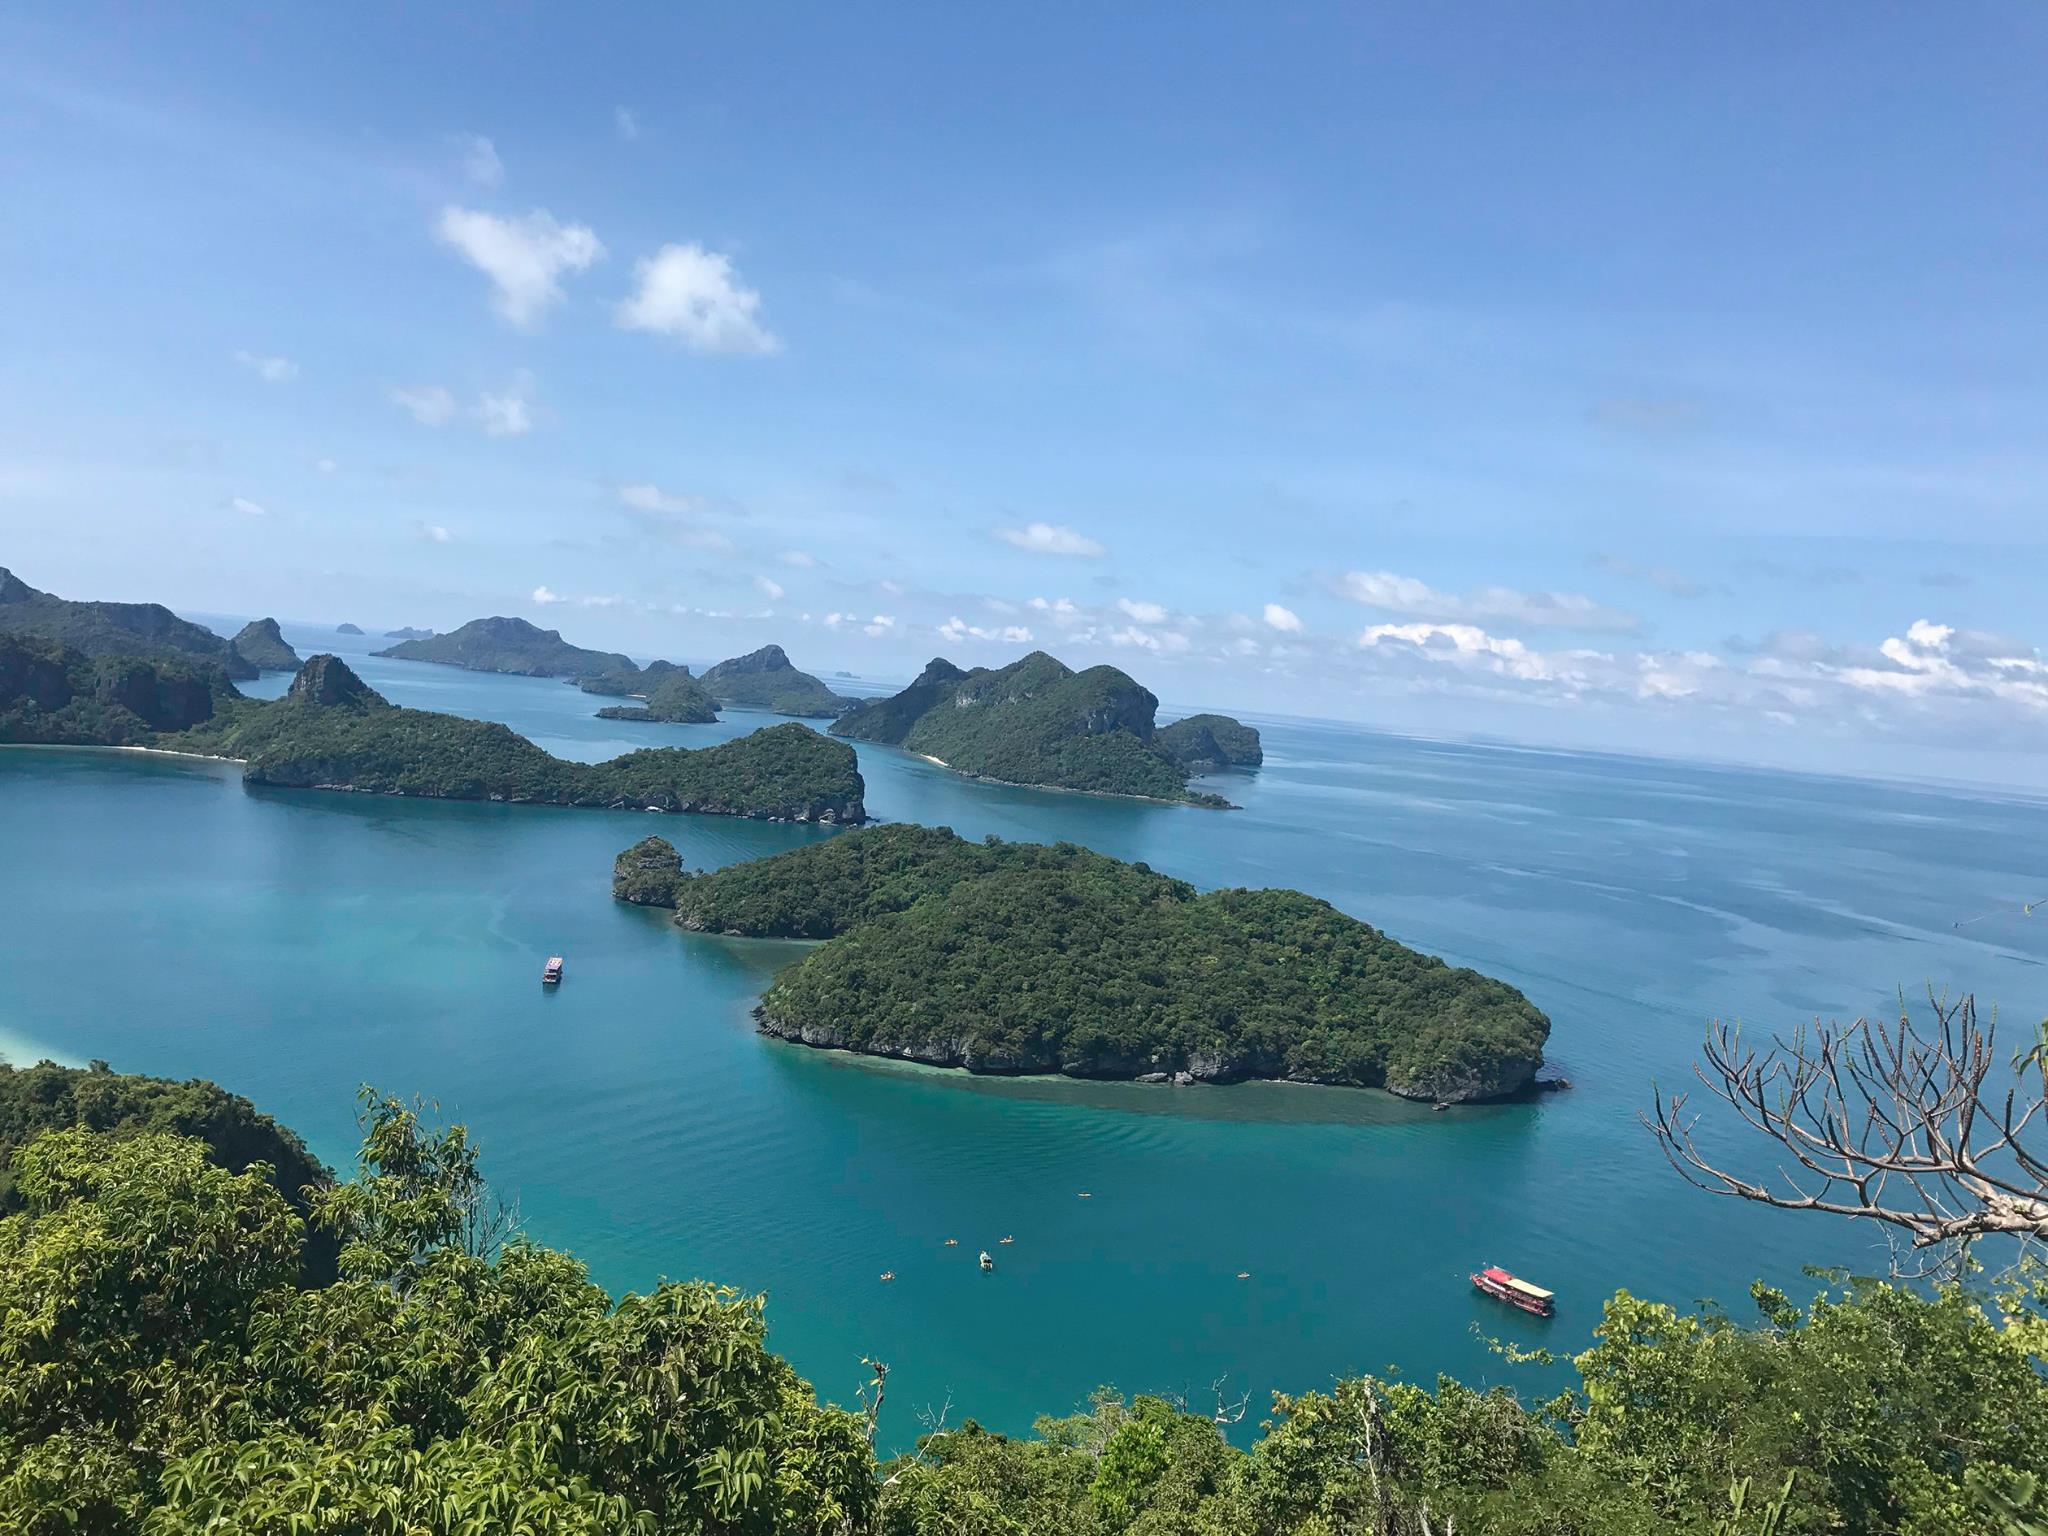 The 42 islands of the Angthong Marine National Park